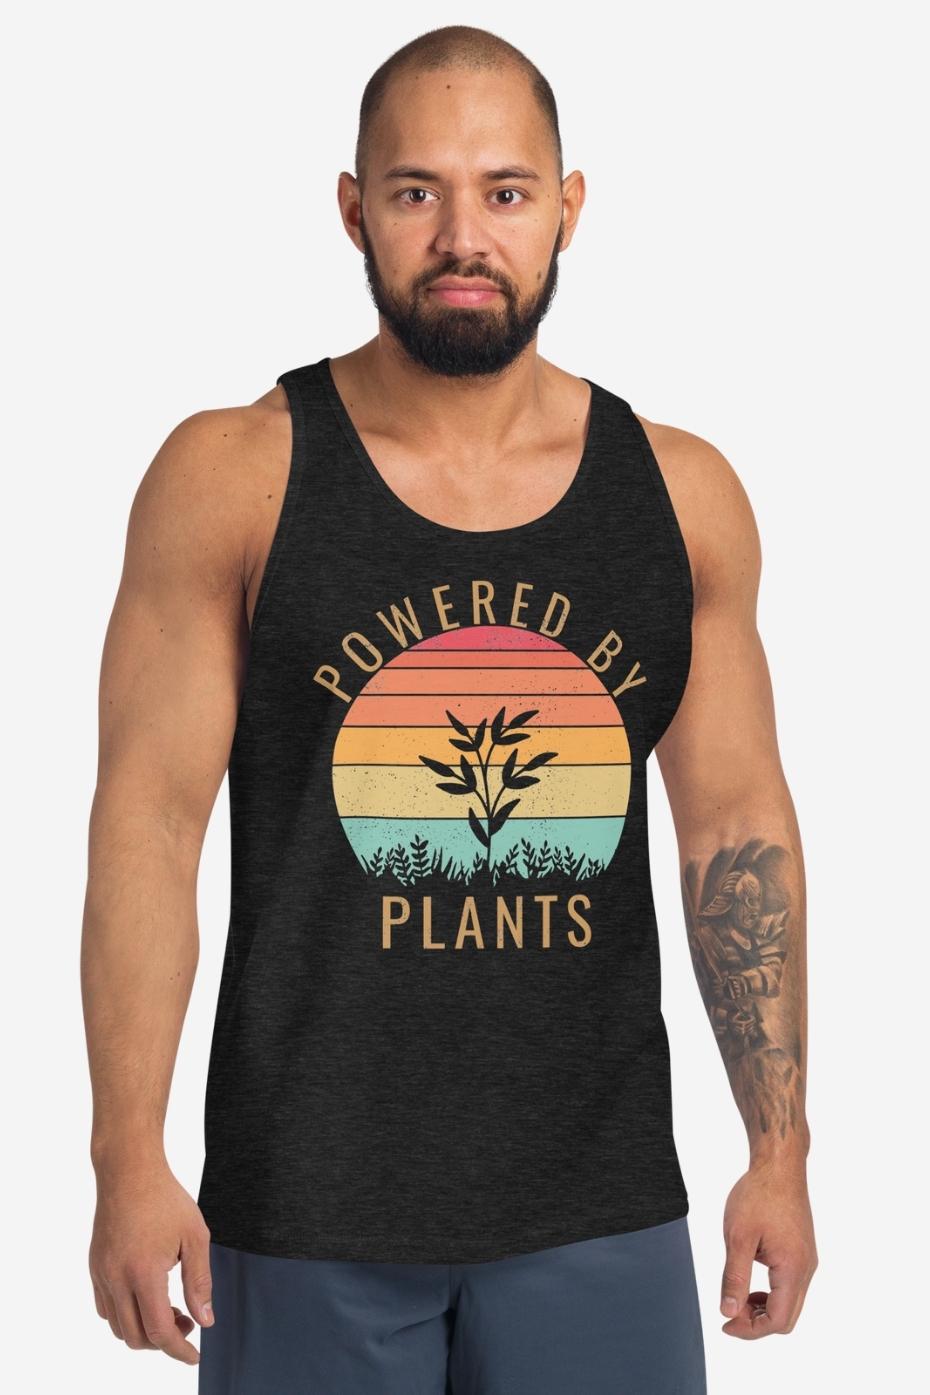 Powered by Plants - Unisex Tank Top